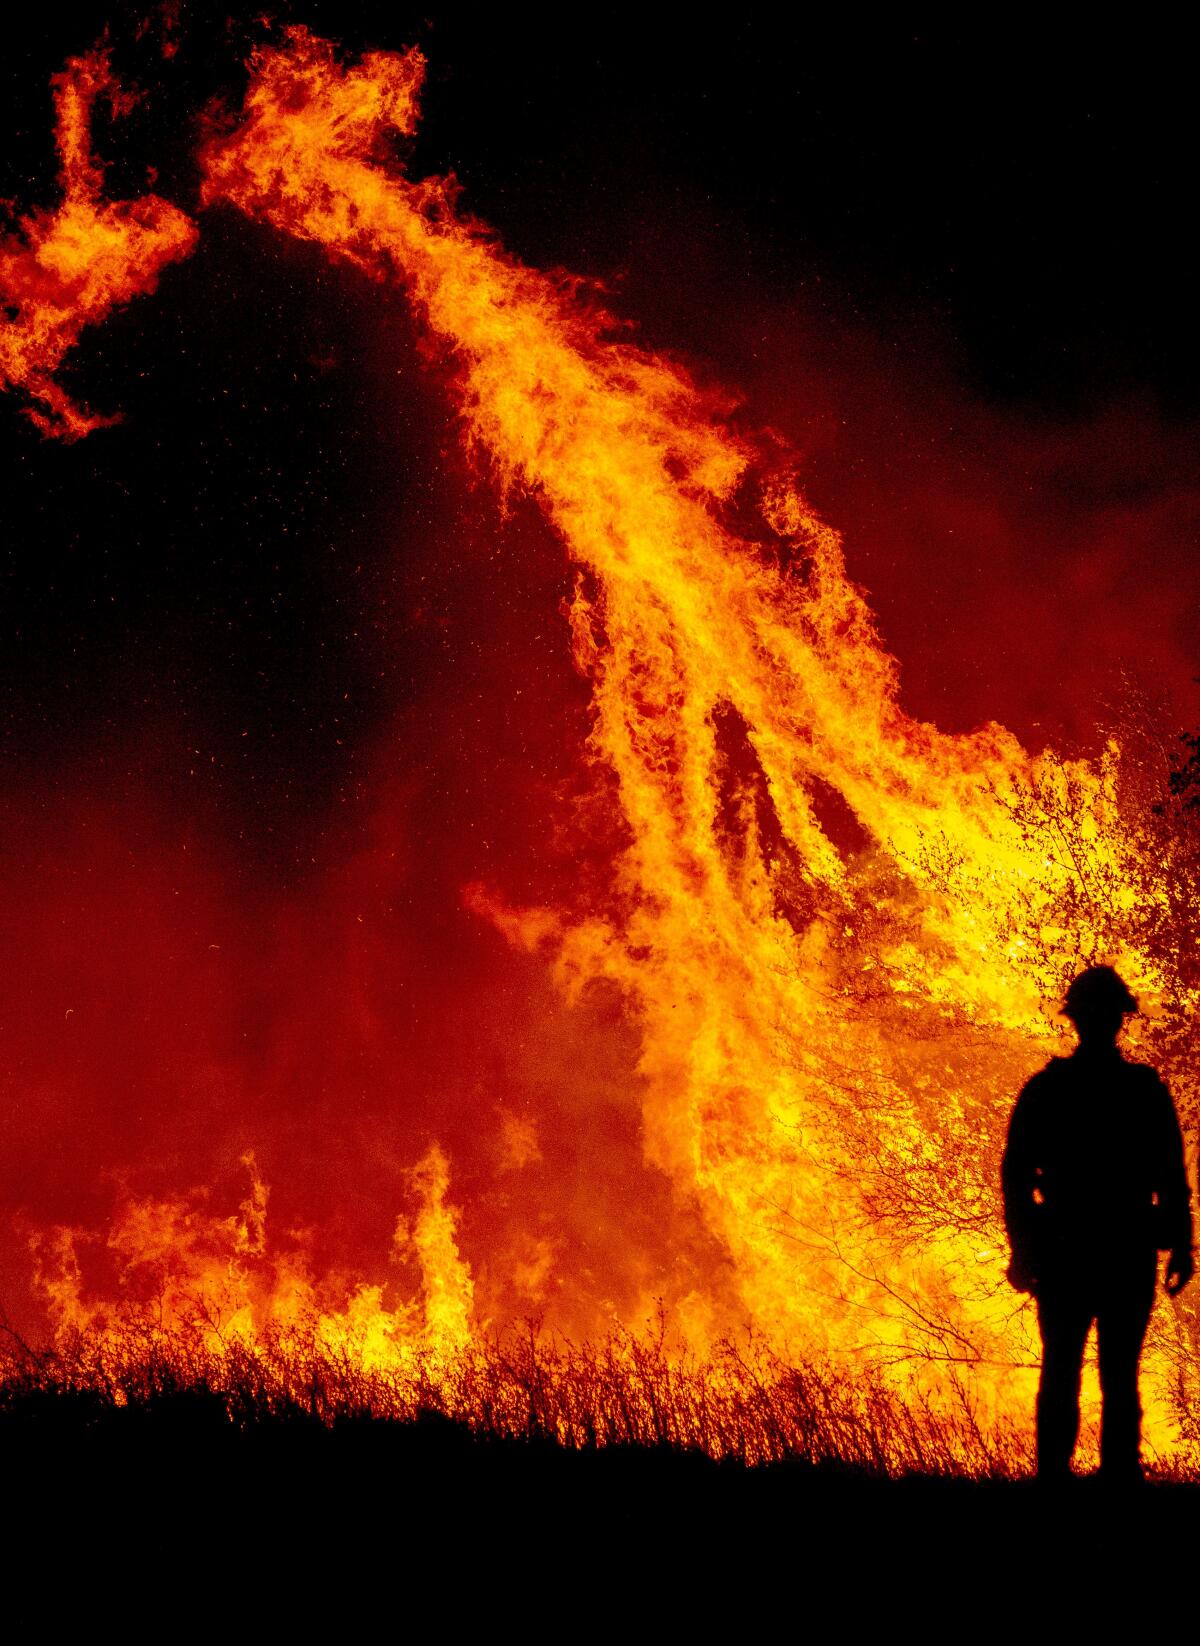 A firefighter is silhouetted against a wall of orange flame